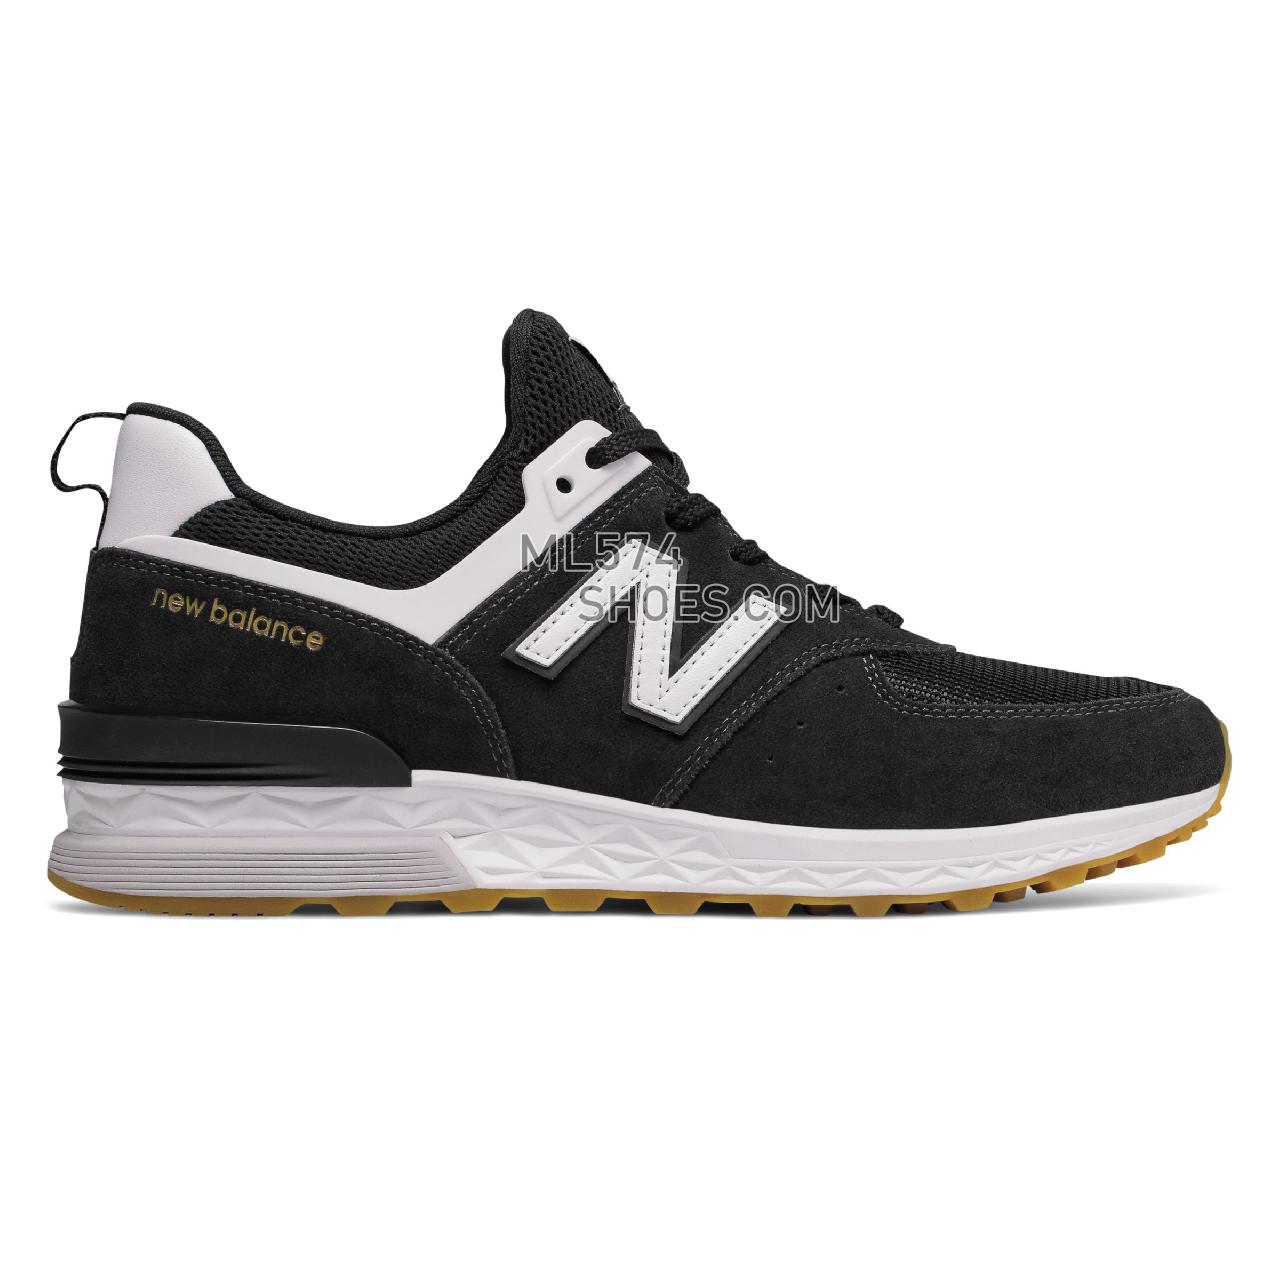 New Balance 574 Sport - Men's 574 - Classic Black with White - MS574FCB